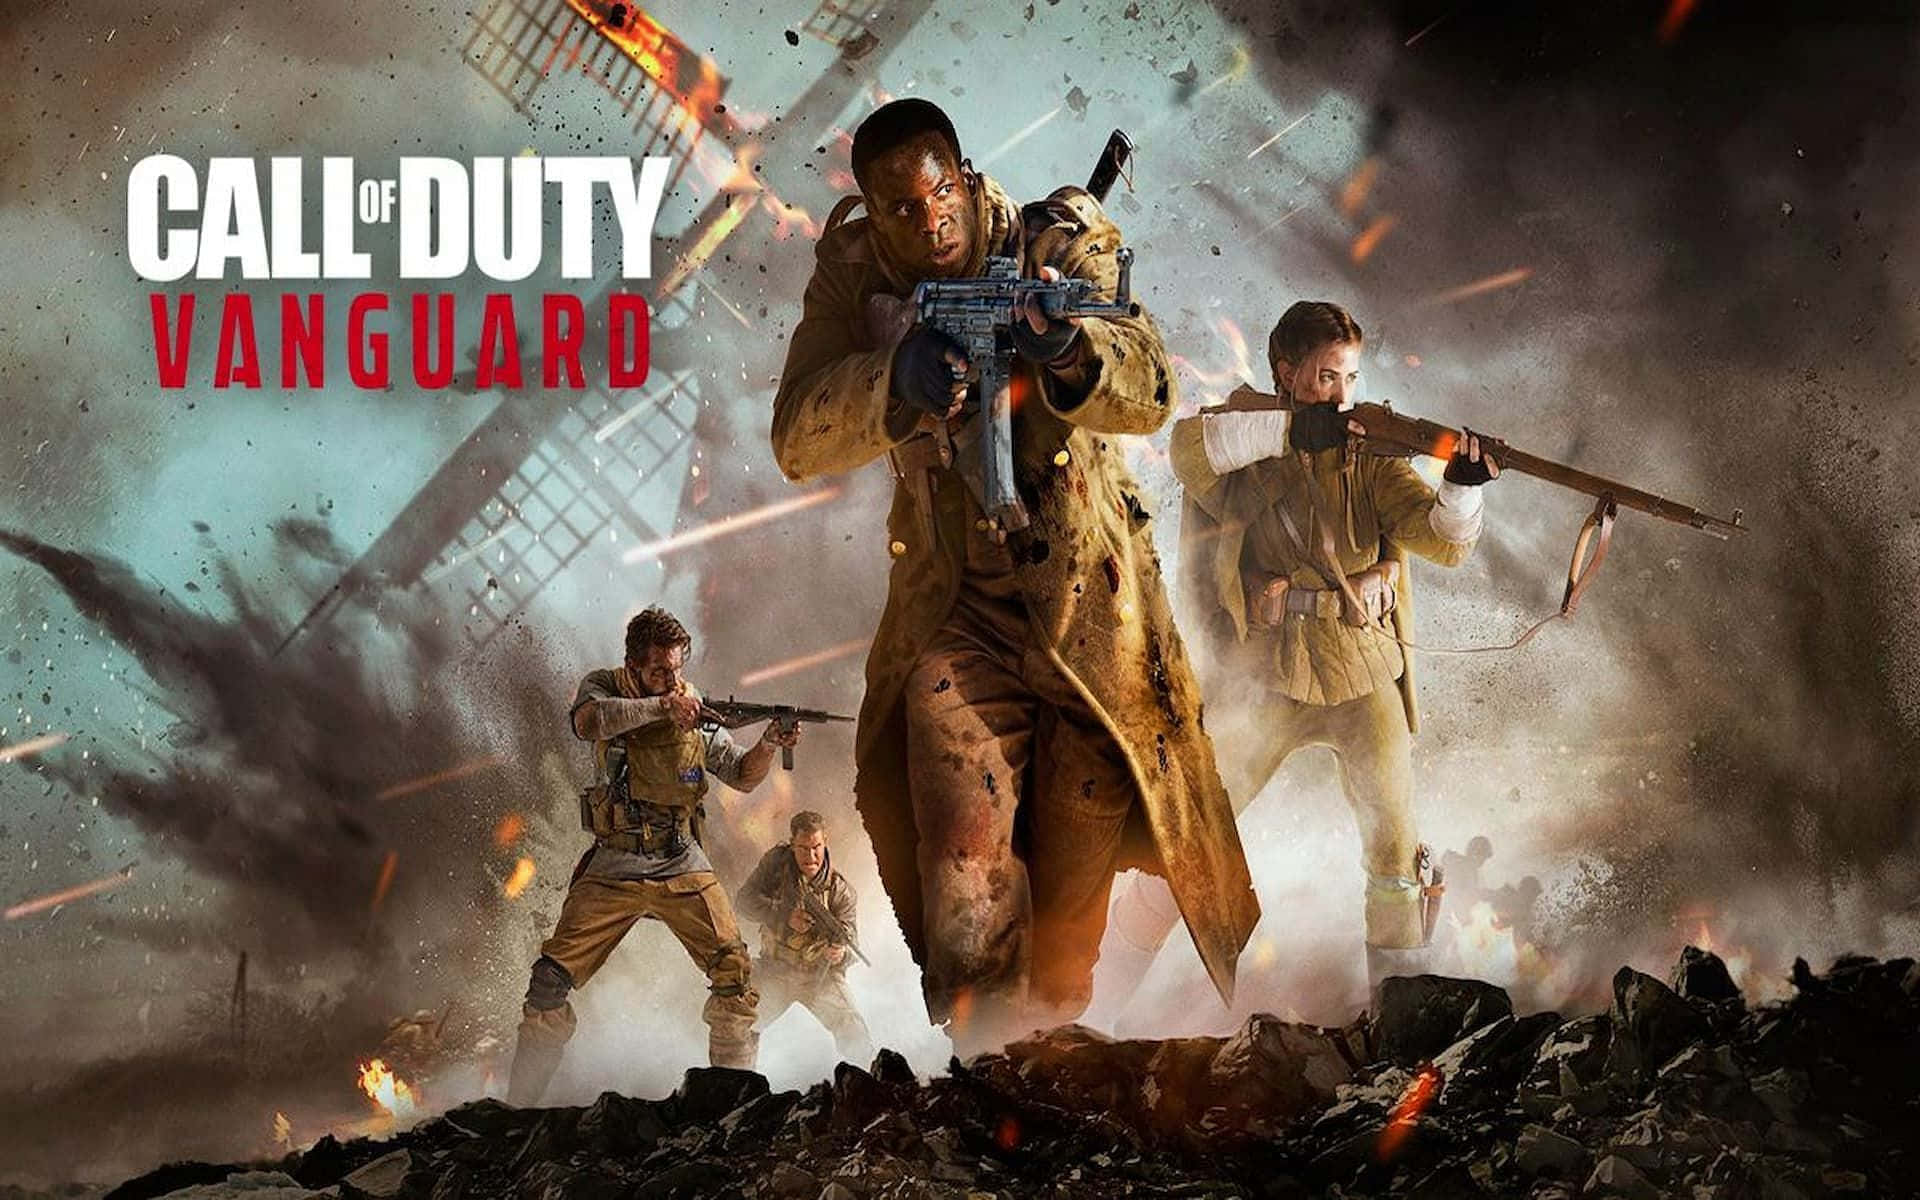 Experience the adrenaline rush of intense military combat in Call of Duty Black Ops 4